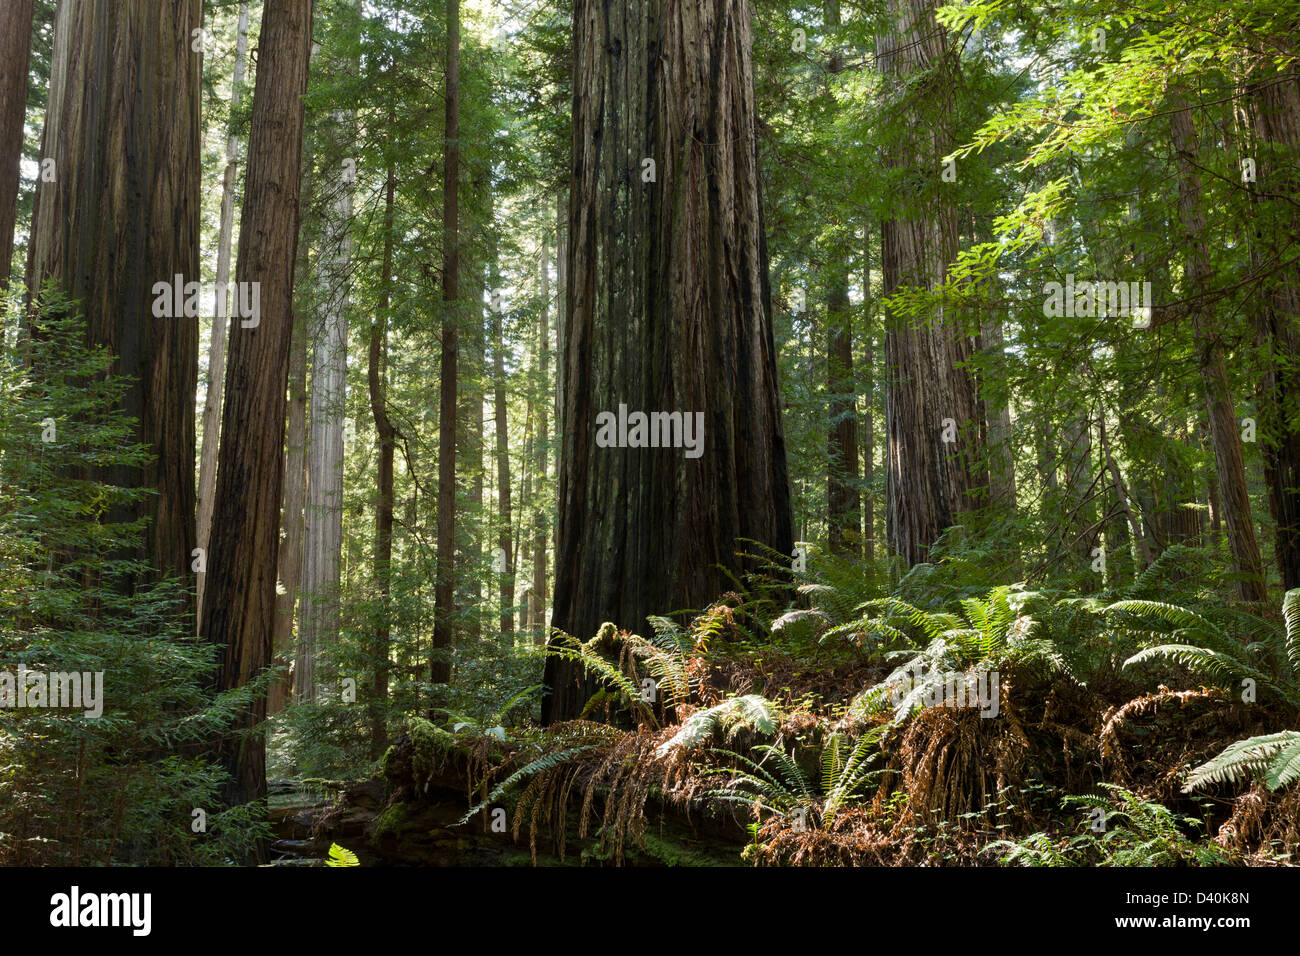 Luxurious fern-rich coast redwood forest in Founders Grove, Humboldt Redwoods State Park, California, USA Stock Photo